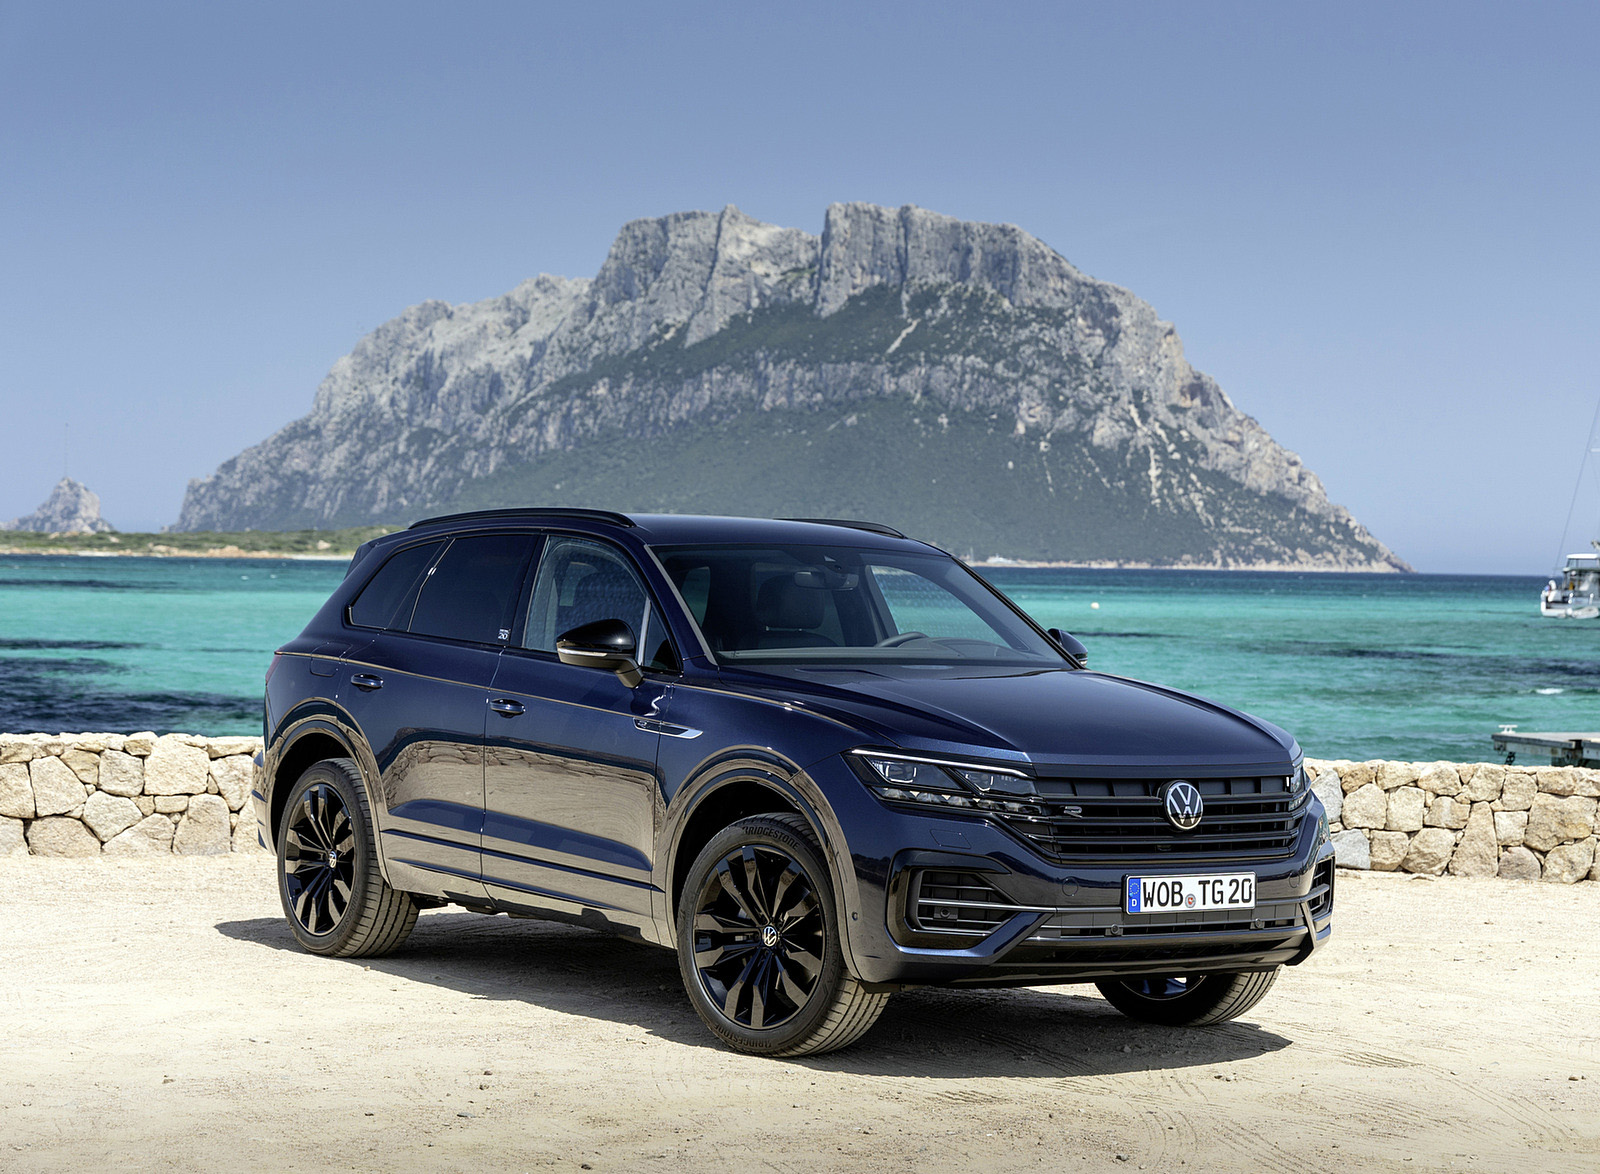 2022 Volkswagen Touareg EDITION 20 Front Three-Quarter Wallpapers (3)